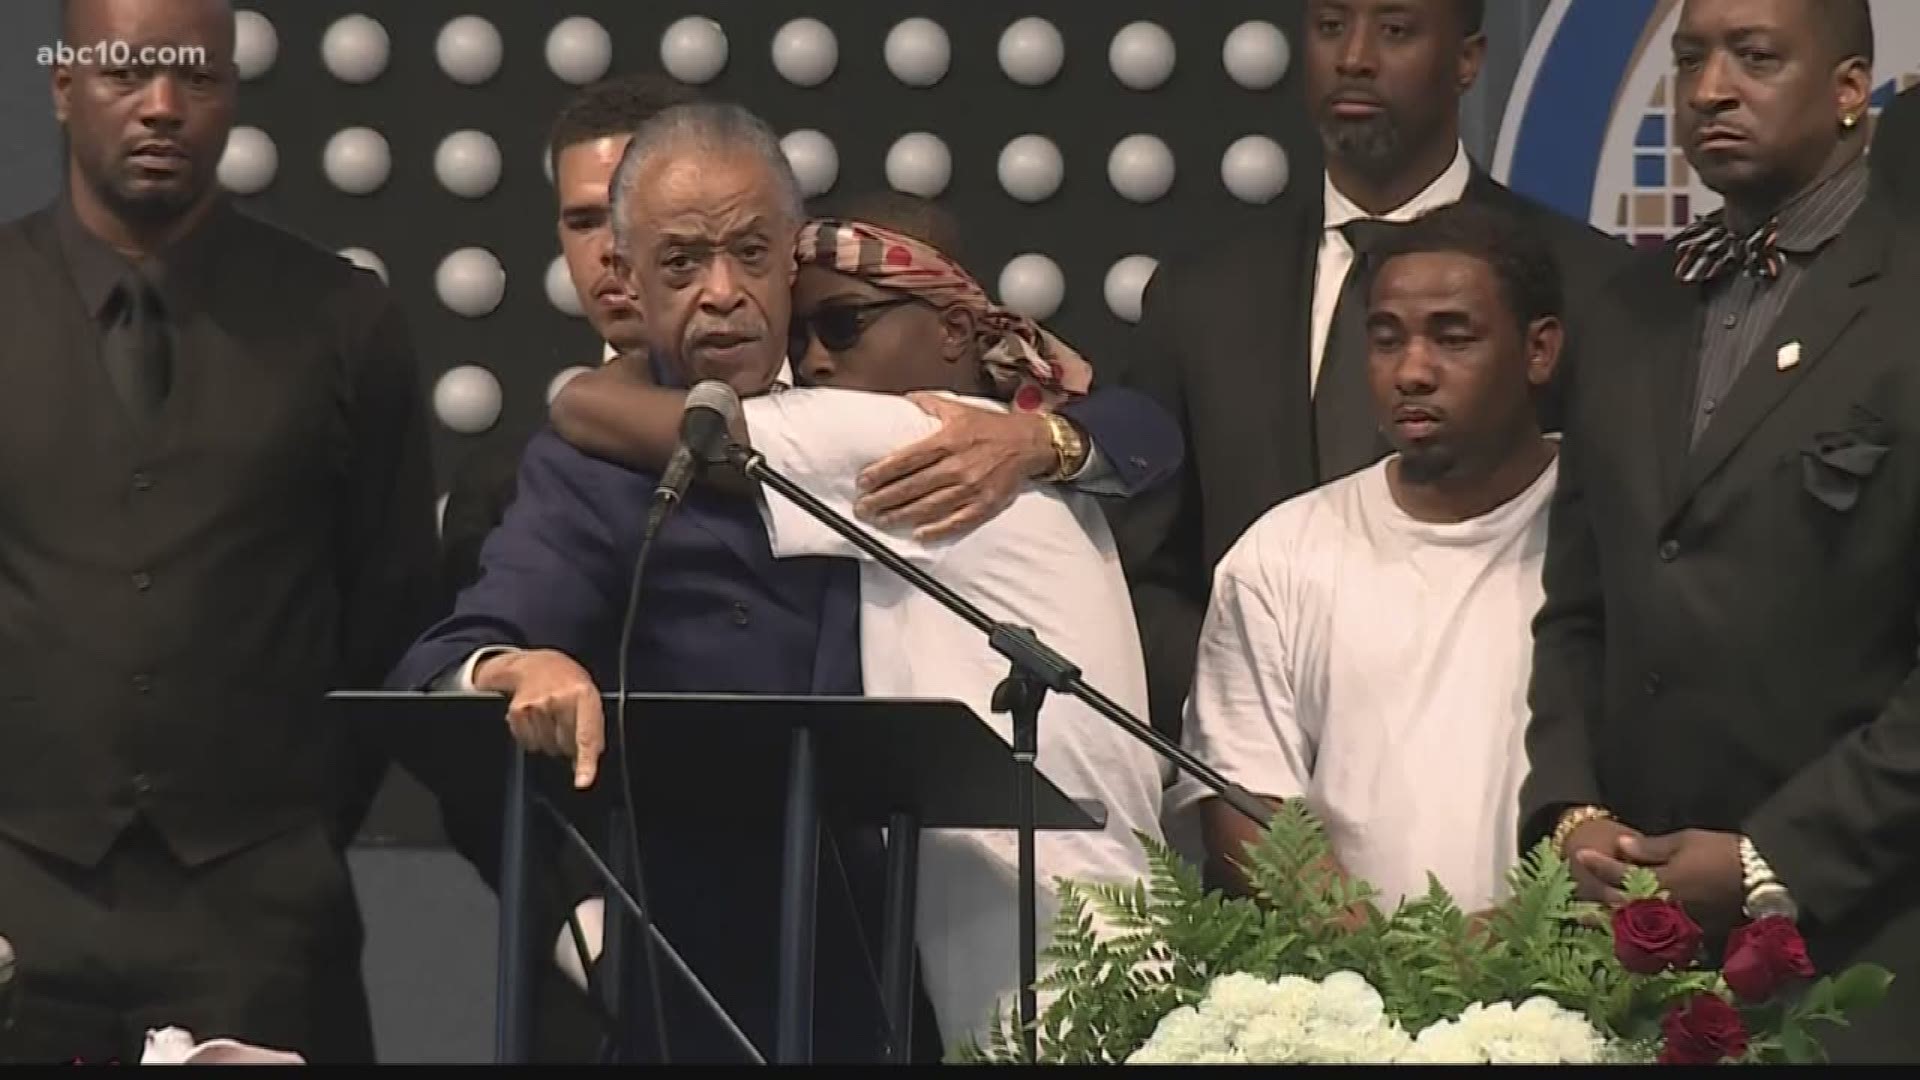 Rev. Sharpton was tasked with doing Stephon Clark's eulogy, but residents had mixed emotions. (Mar. 29, 2018)